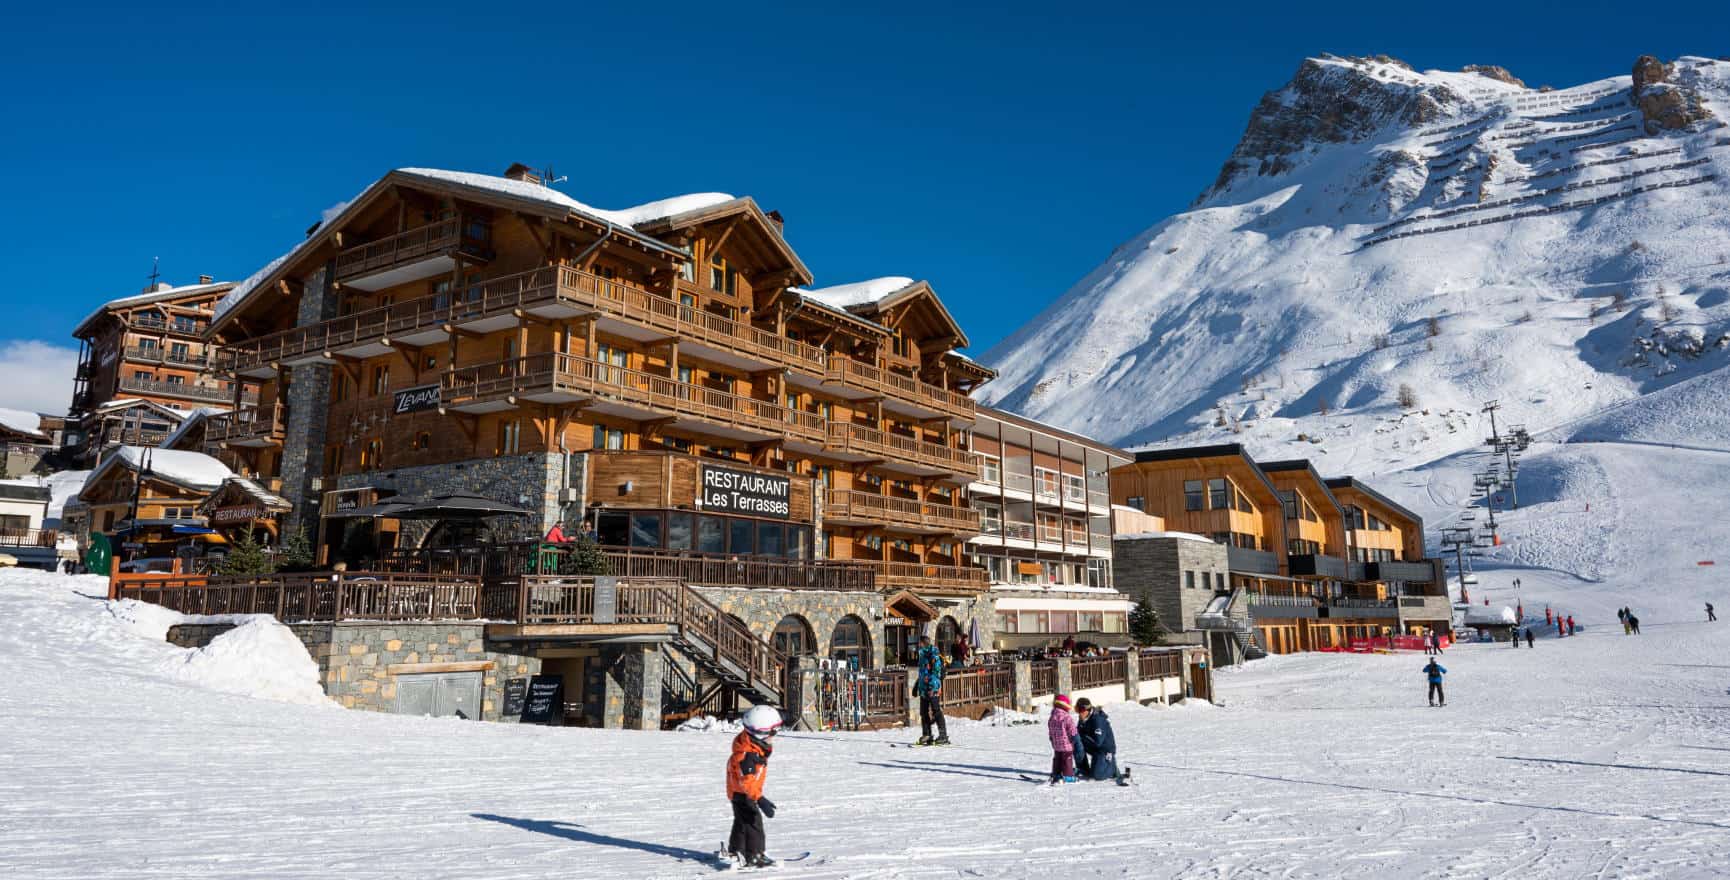 Browse a range of handpicked ski hotels for your holiday